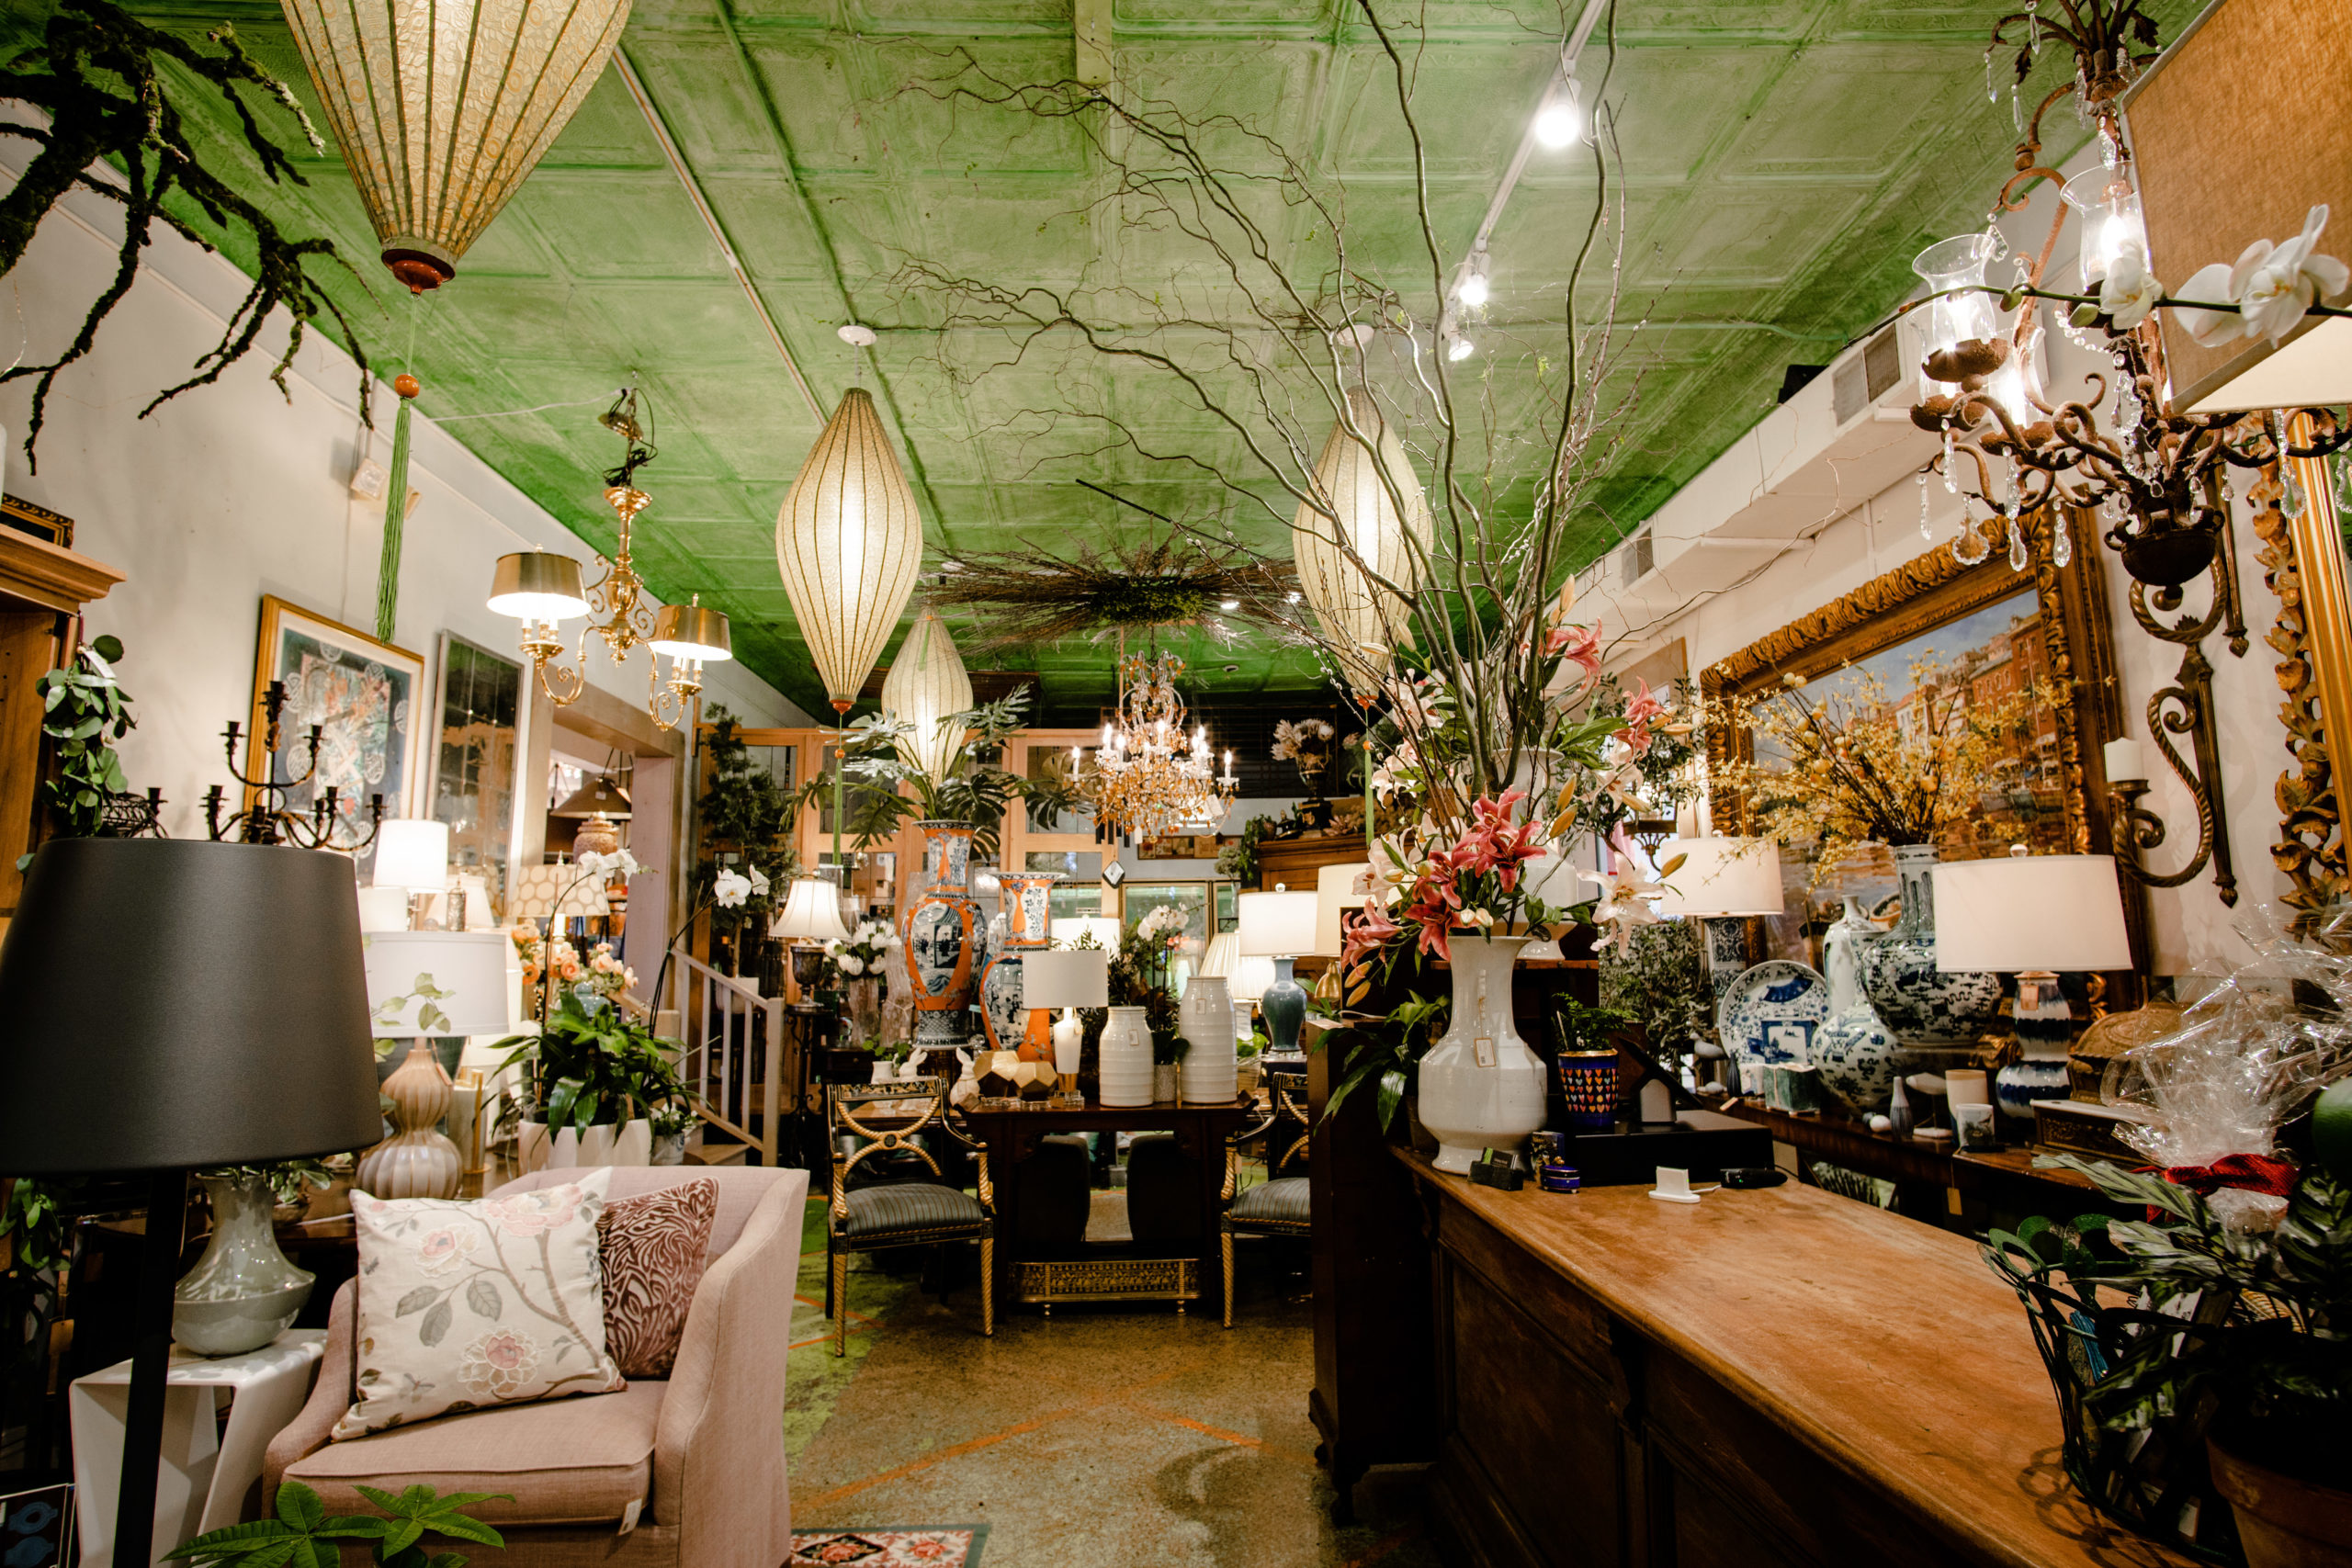 Grassy Knoll, a floral and interior designer in High Point, NC has a gift shop and expert in High Point.